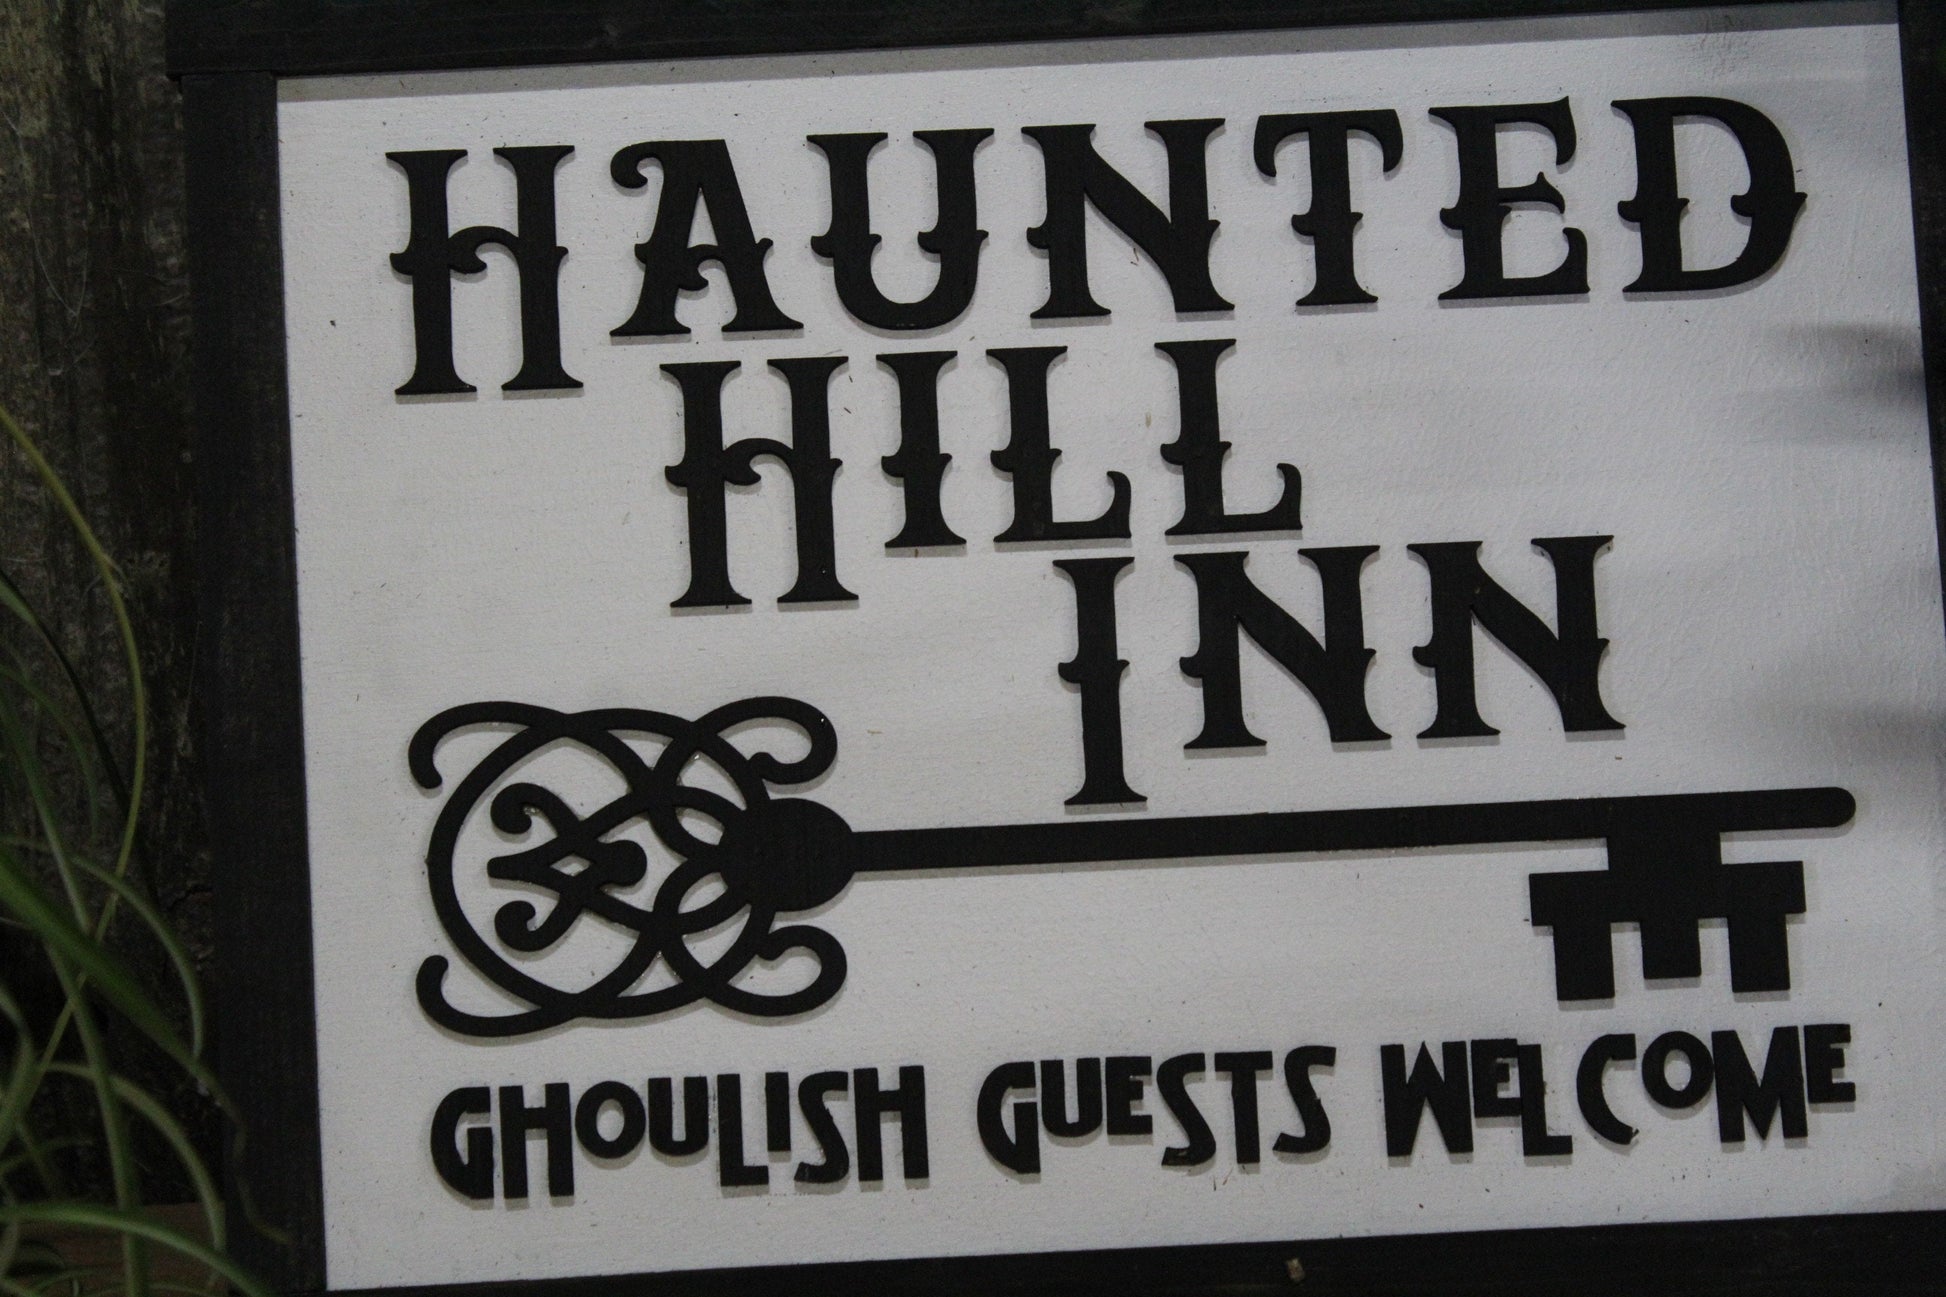 Haunted Hill Inn Sign Ghoul Ghosts Key Black White Guest Welcome Entry Small Rectangle Wood Rustic Scary Fun Artwork 3D Raised Lettering